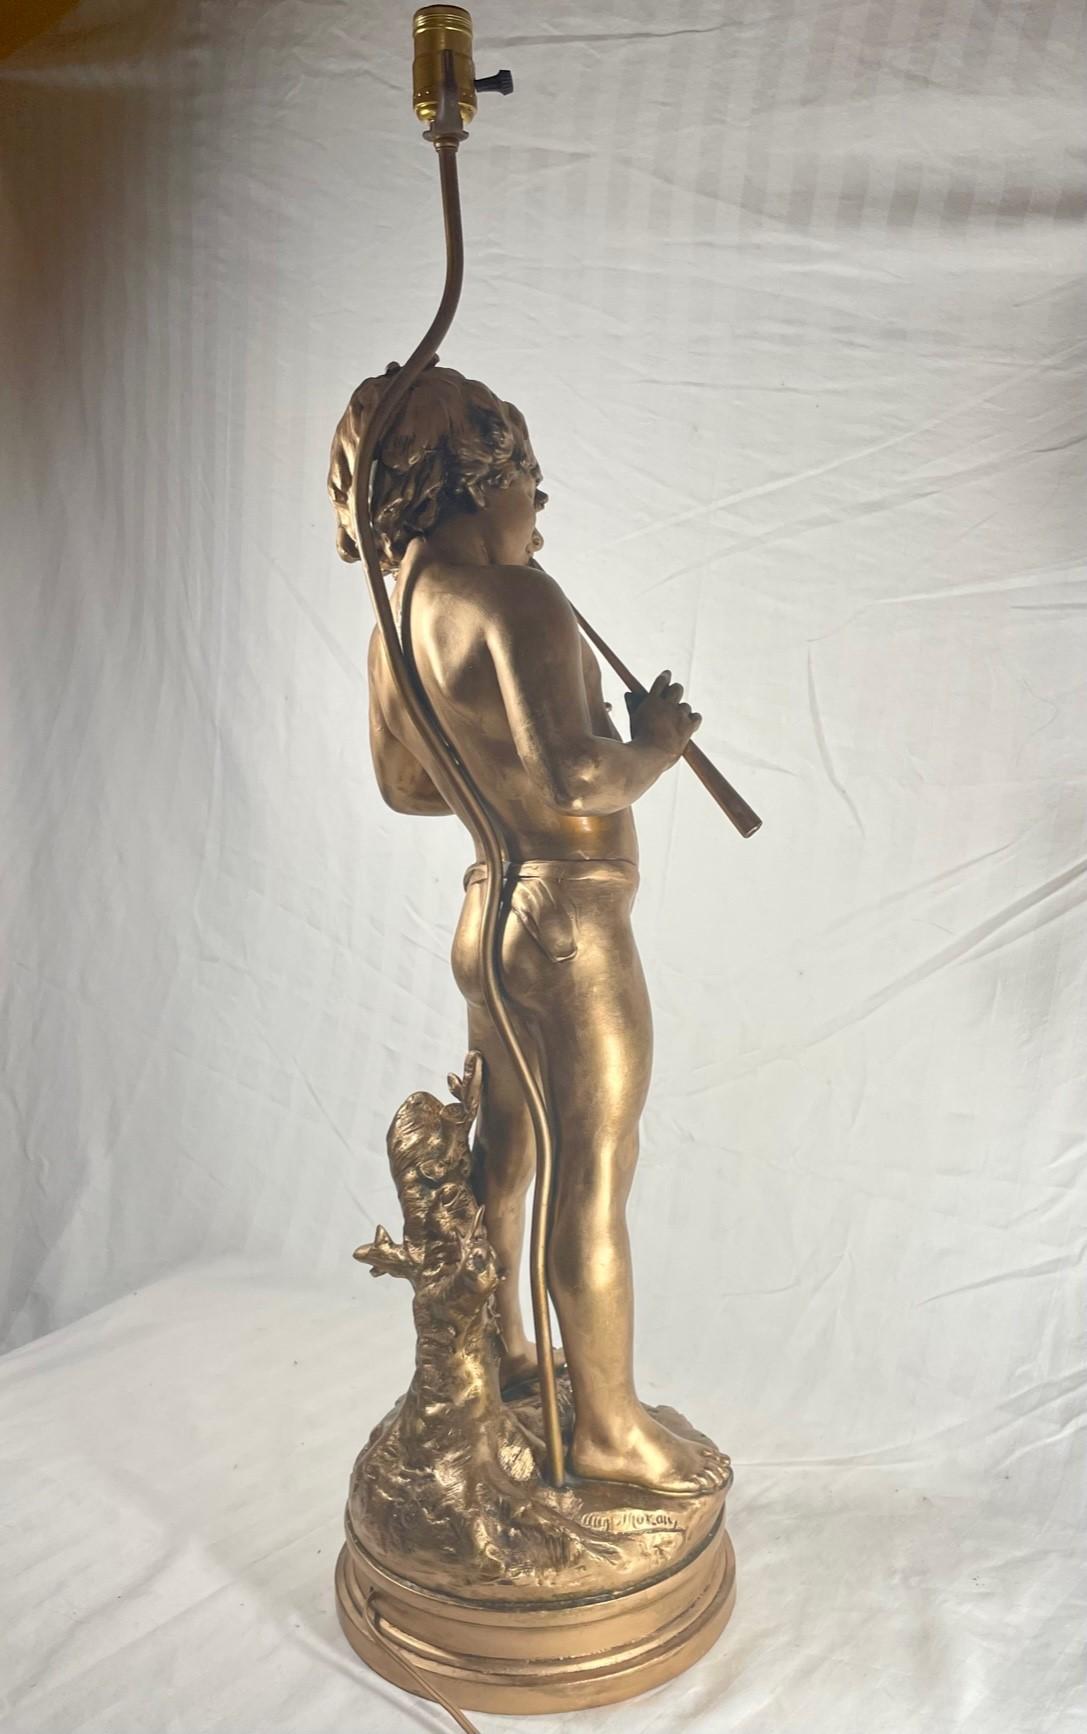 Spelter 19th Century French Gilt Bronzed Lamp Sculpture “Boy with Flute”, Signed Moreau. For Sale